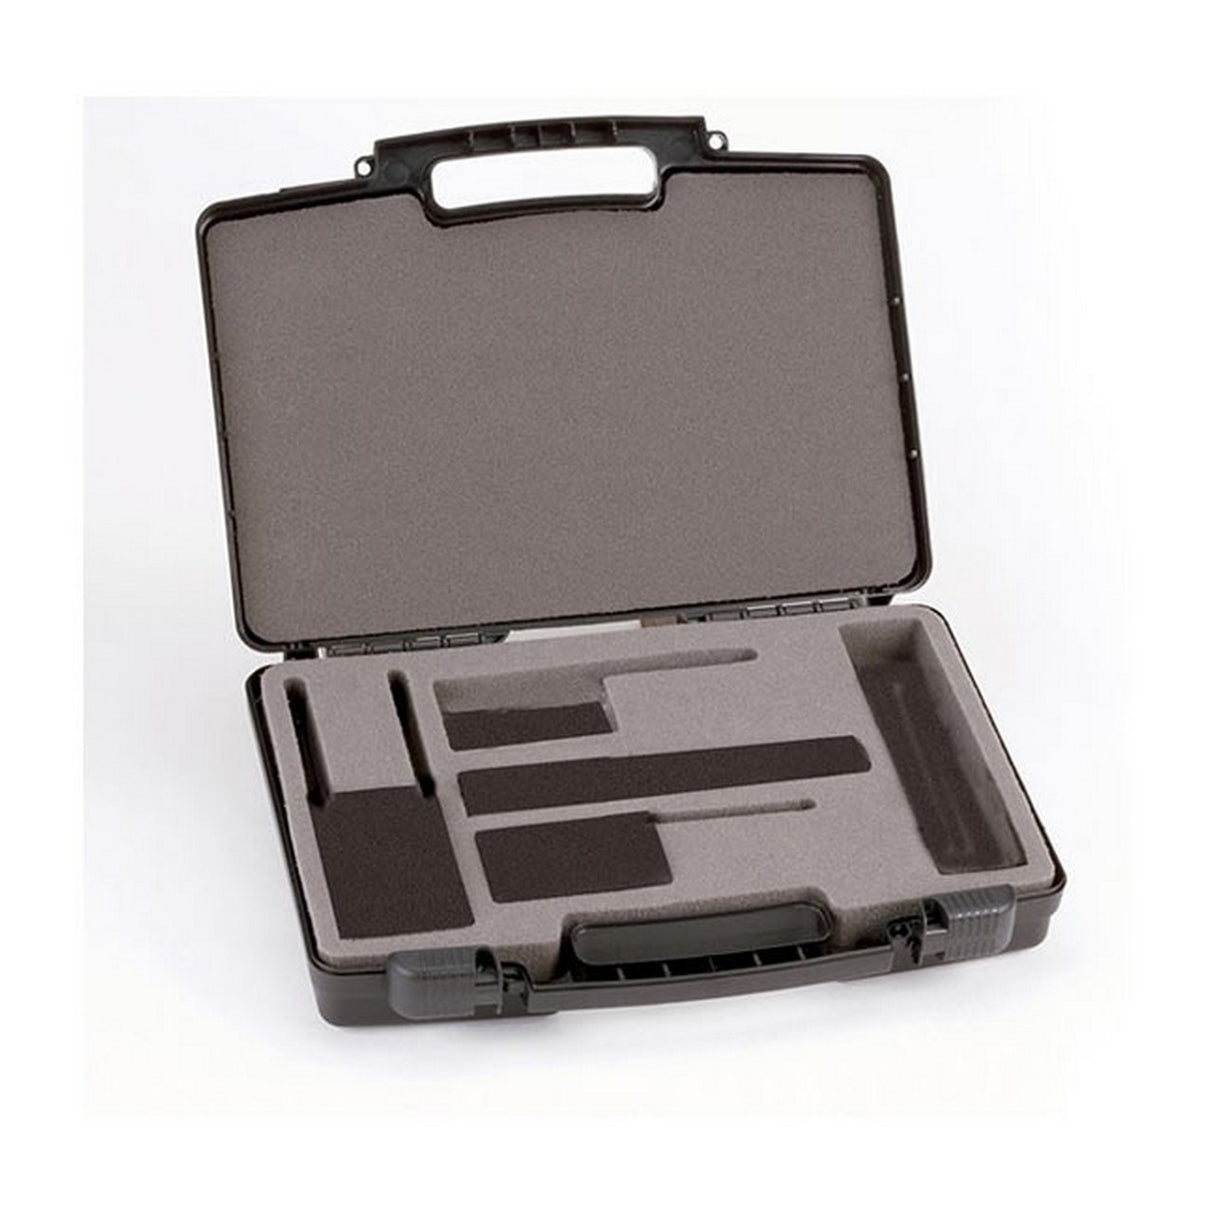 Azden CC-320 | Carrying Case for Wireless Systems